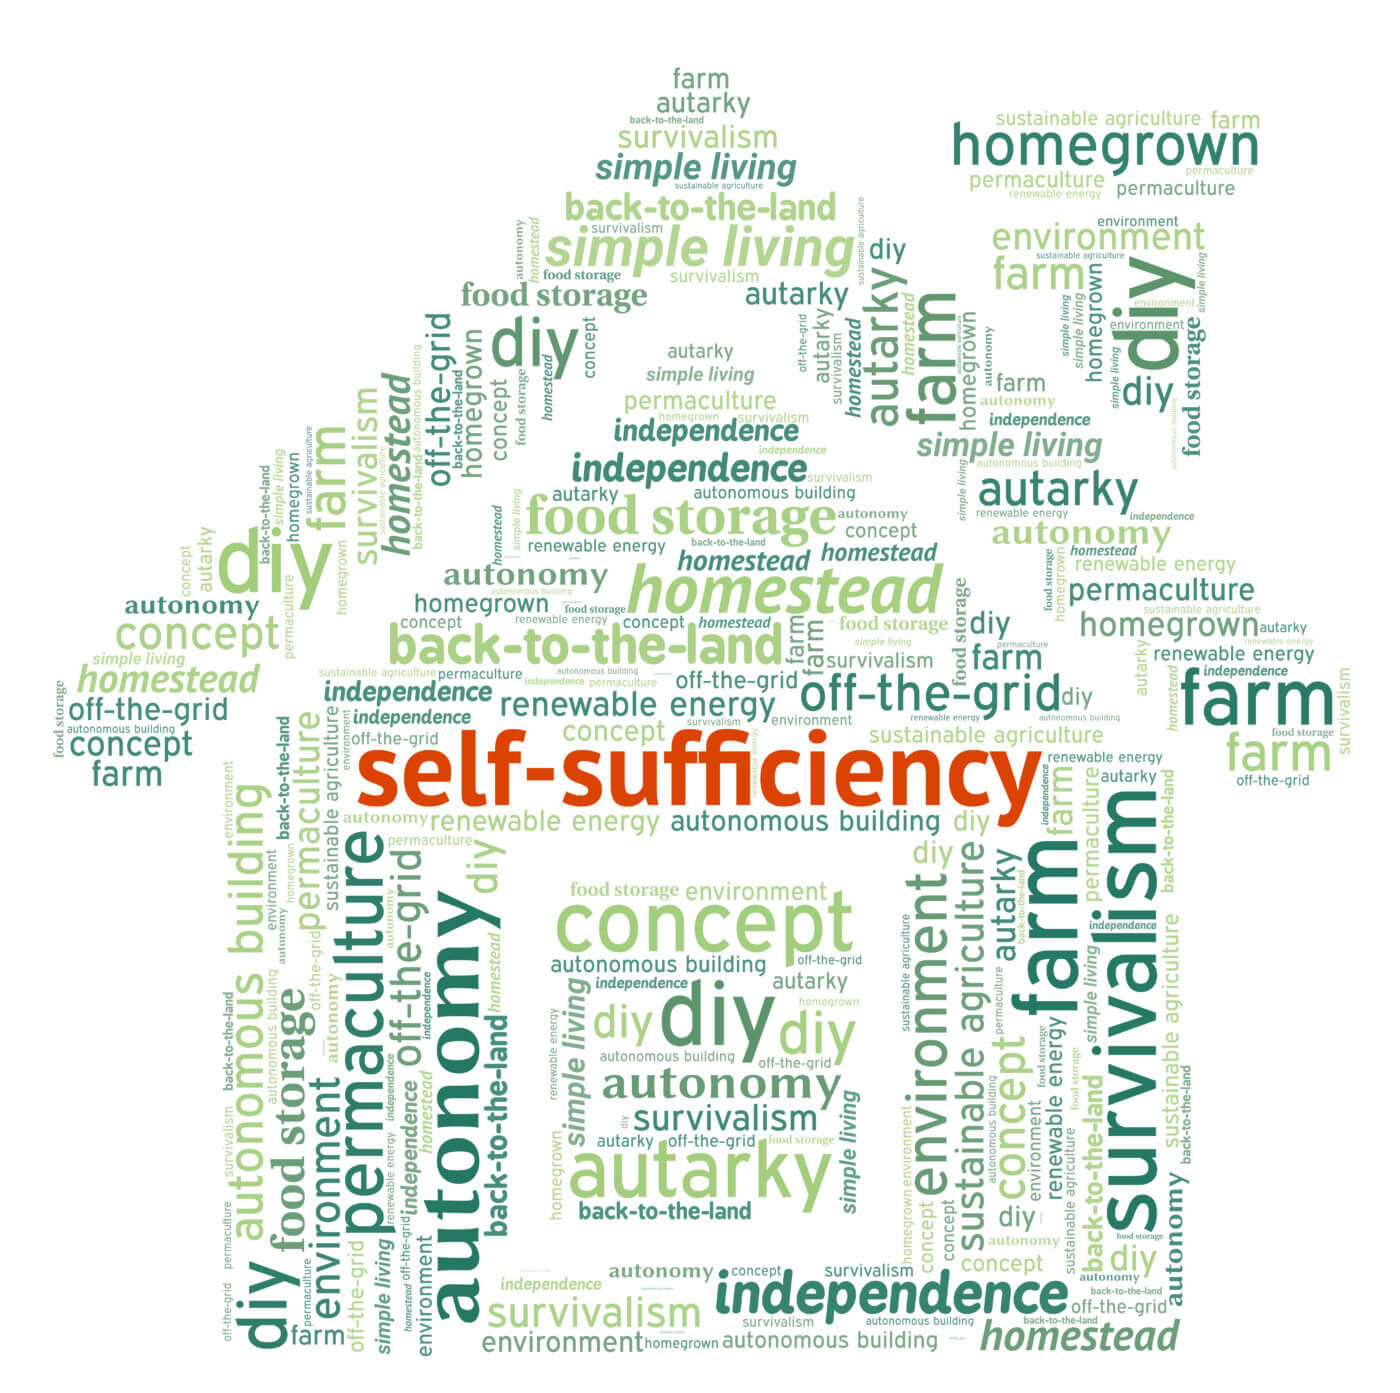 Self-sufficiency